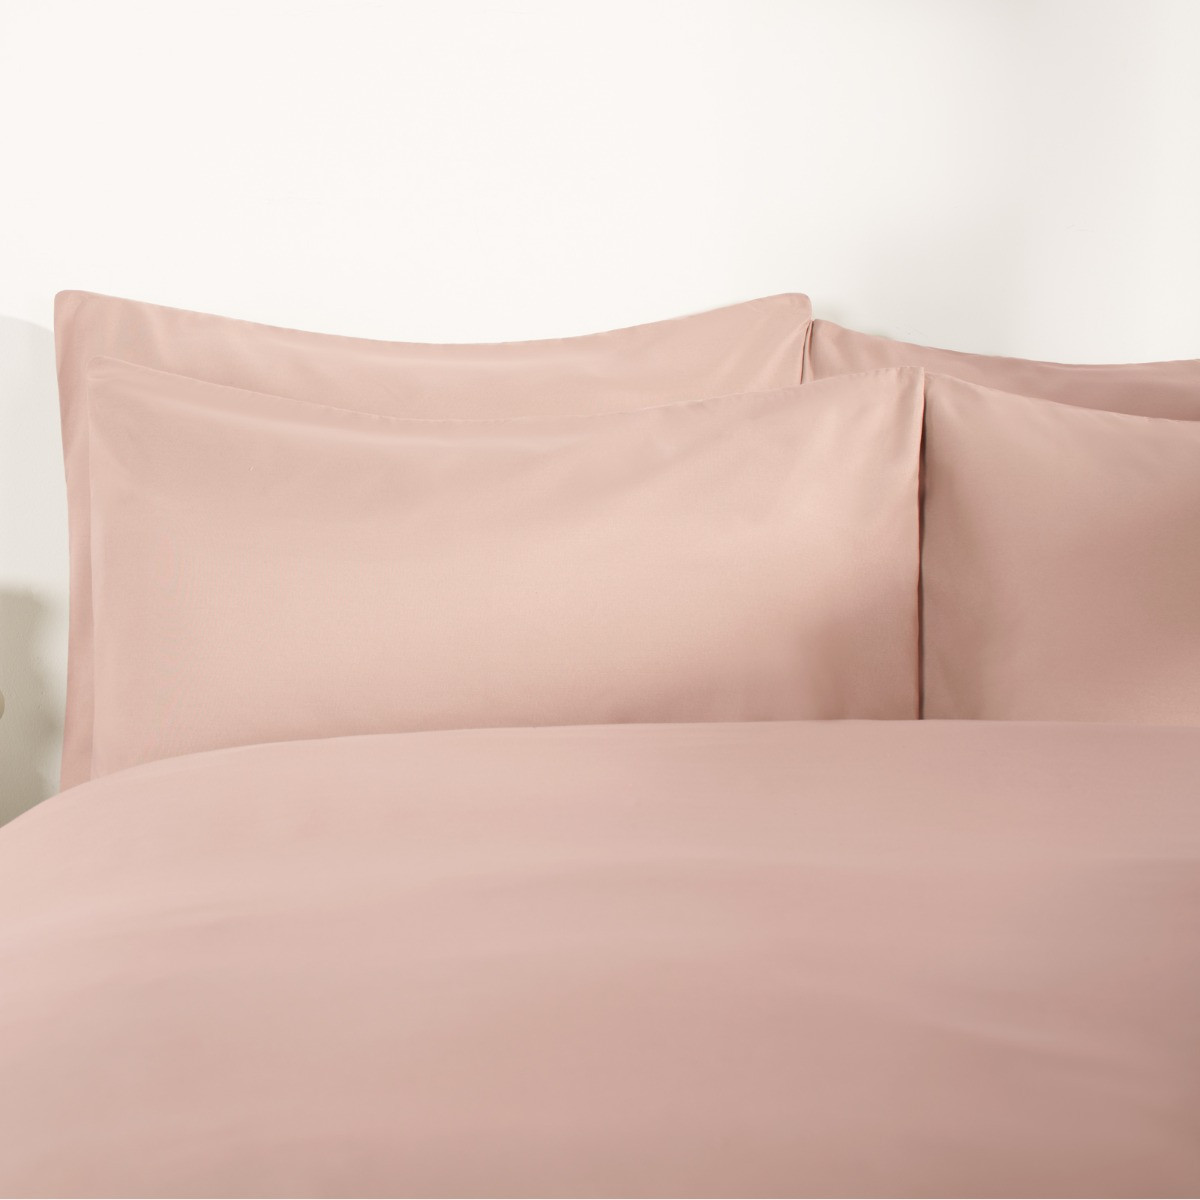 Brentfords 2 Pack Plain Dyed Housewife Pillowcases - Blush>